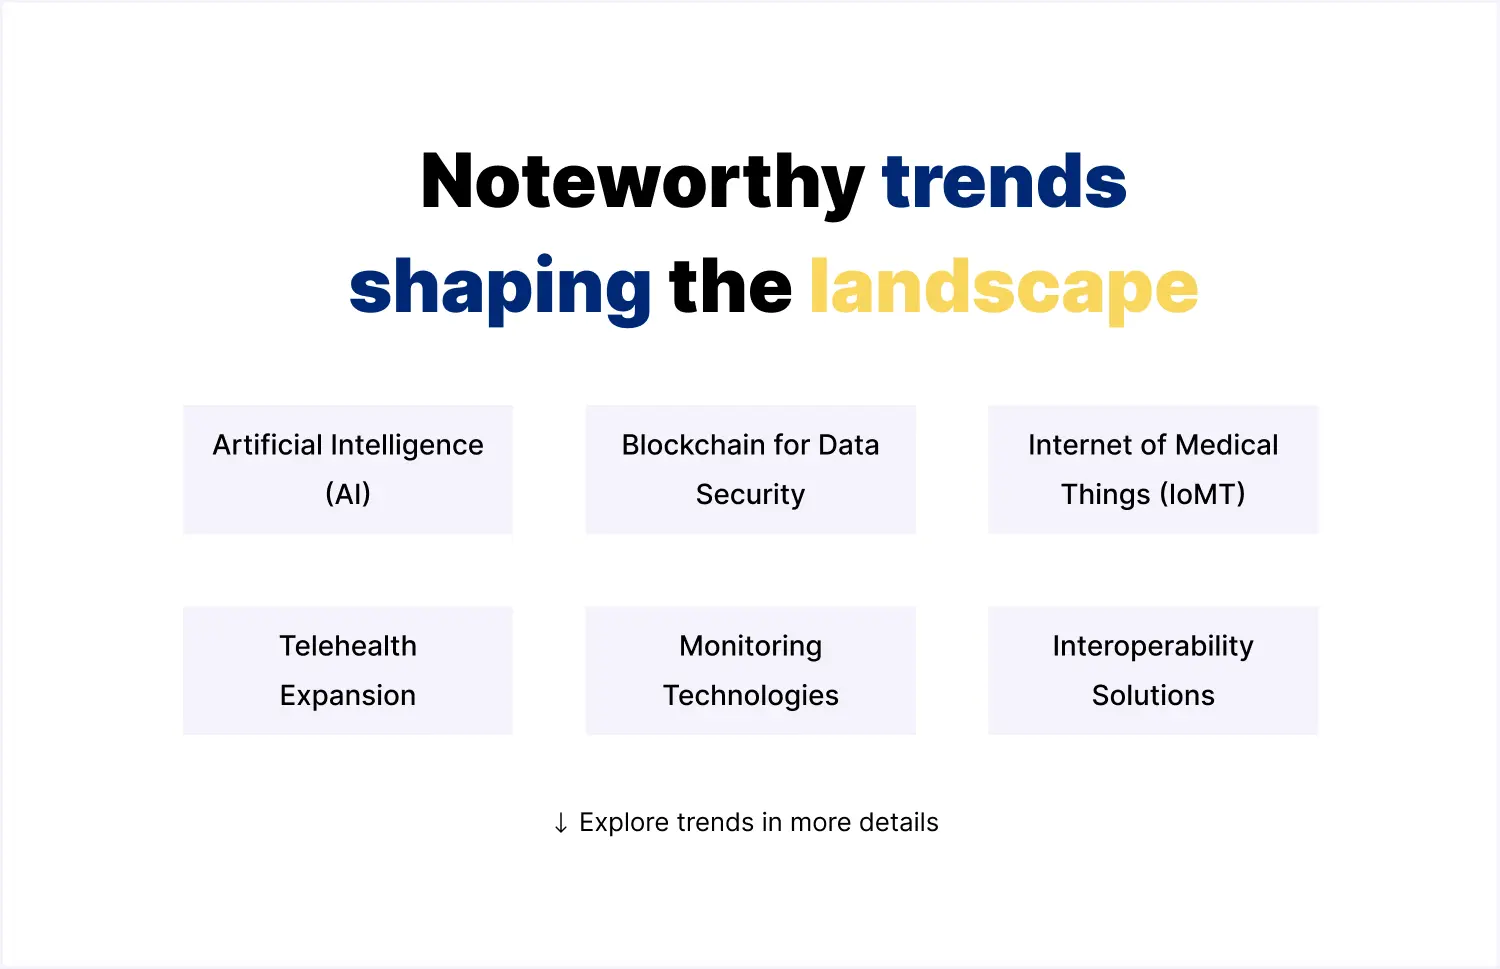 Noteworthy trends shaping the landscape